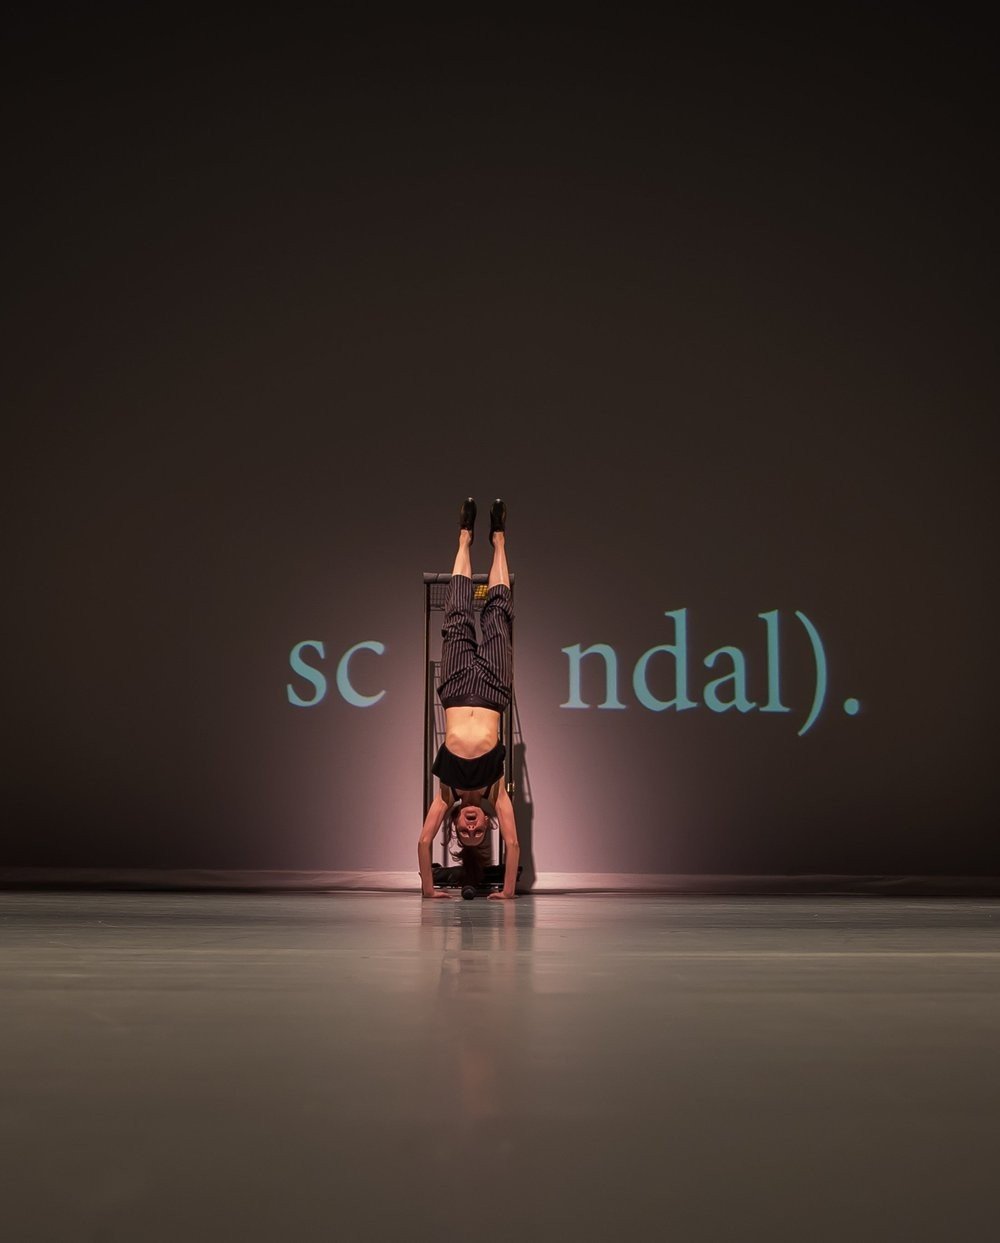 Eunoia's wordplay infuses dance, projections, score, and costumes at the @firehall.arts.⁠
⁠
Canadian choreographer Denise Fujiwara spent years creating dance out of the constraints in Christian B&ouml;k&rsquo;s celebrated, vowel-happy book.⁠
⁠
Head t